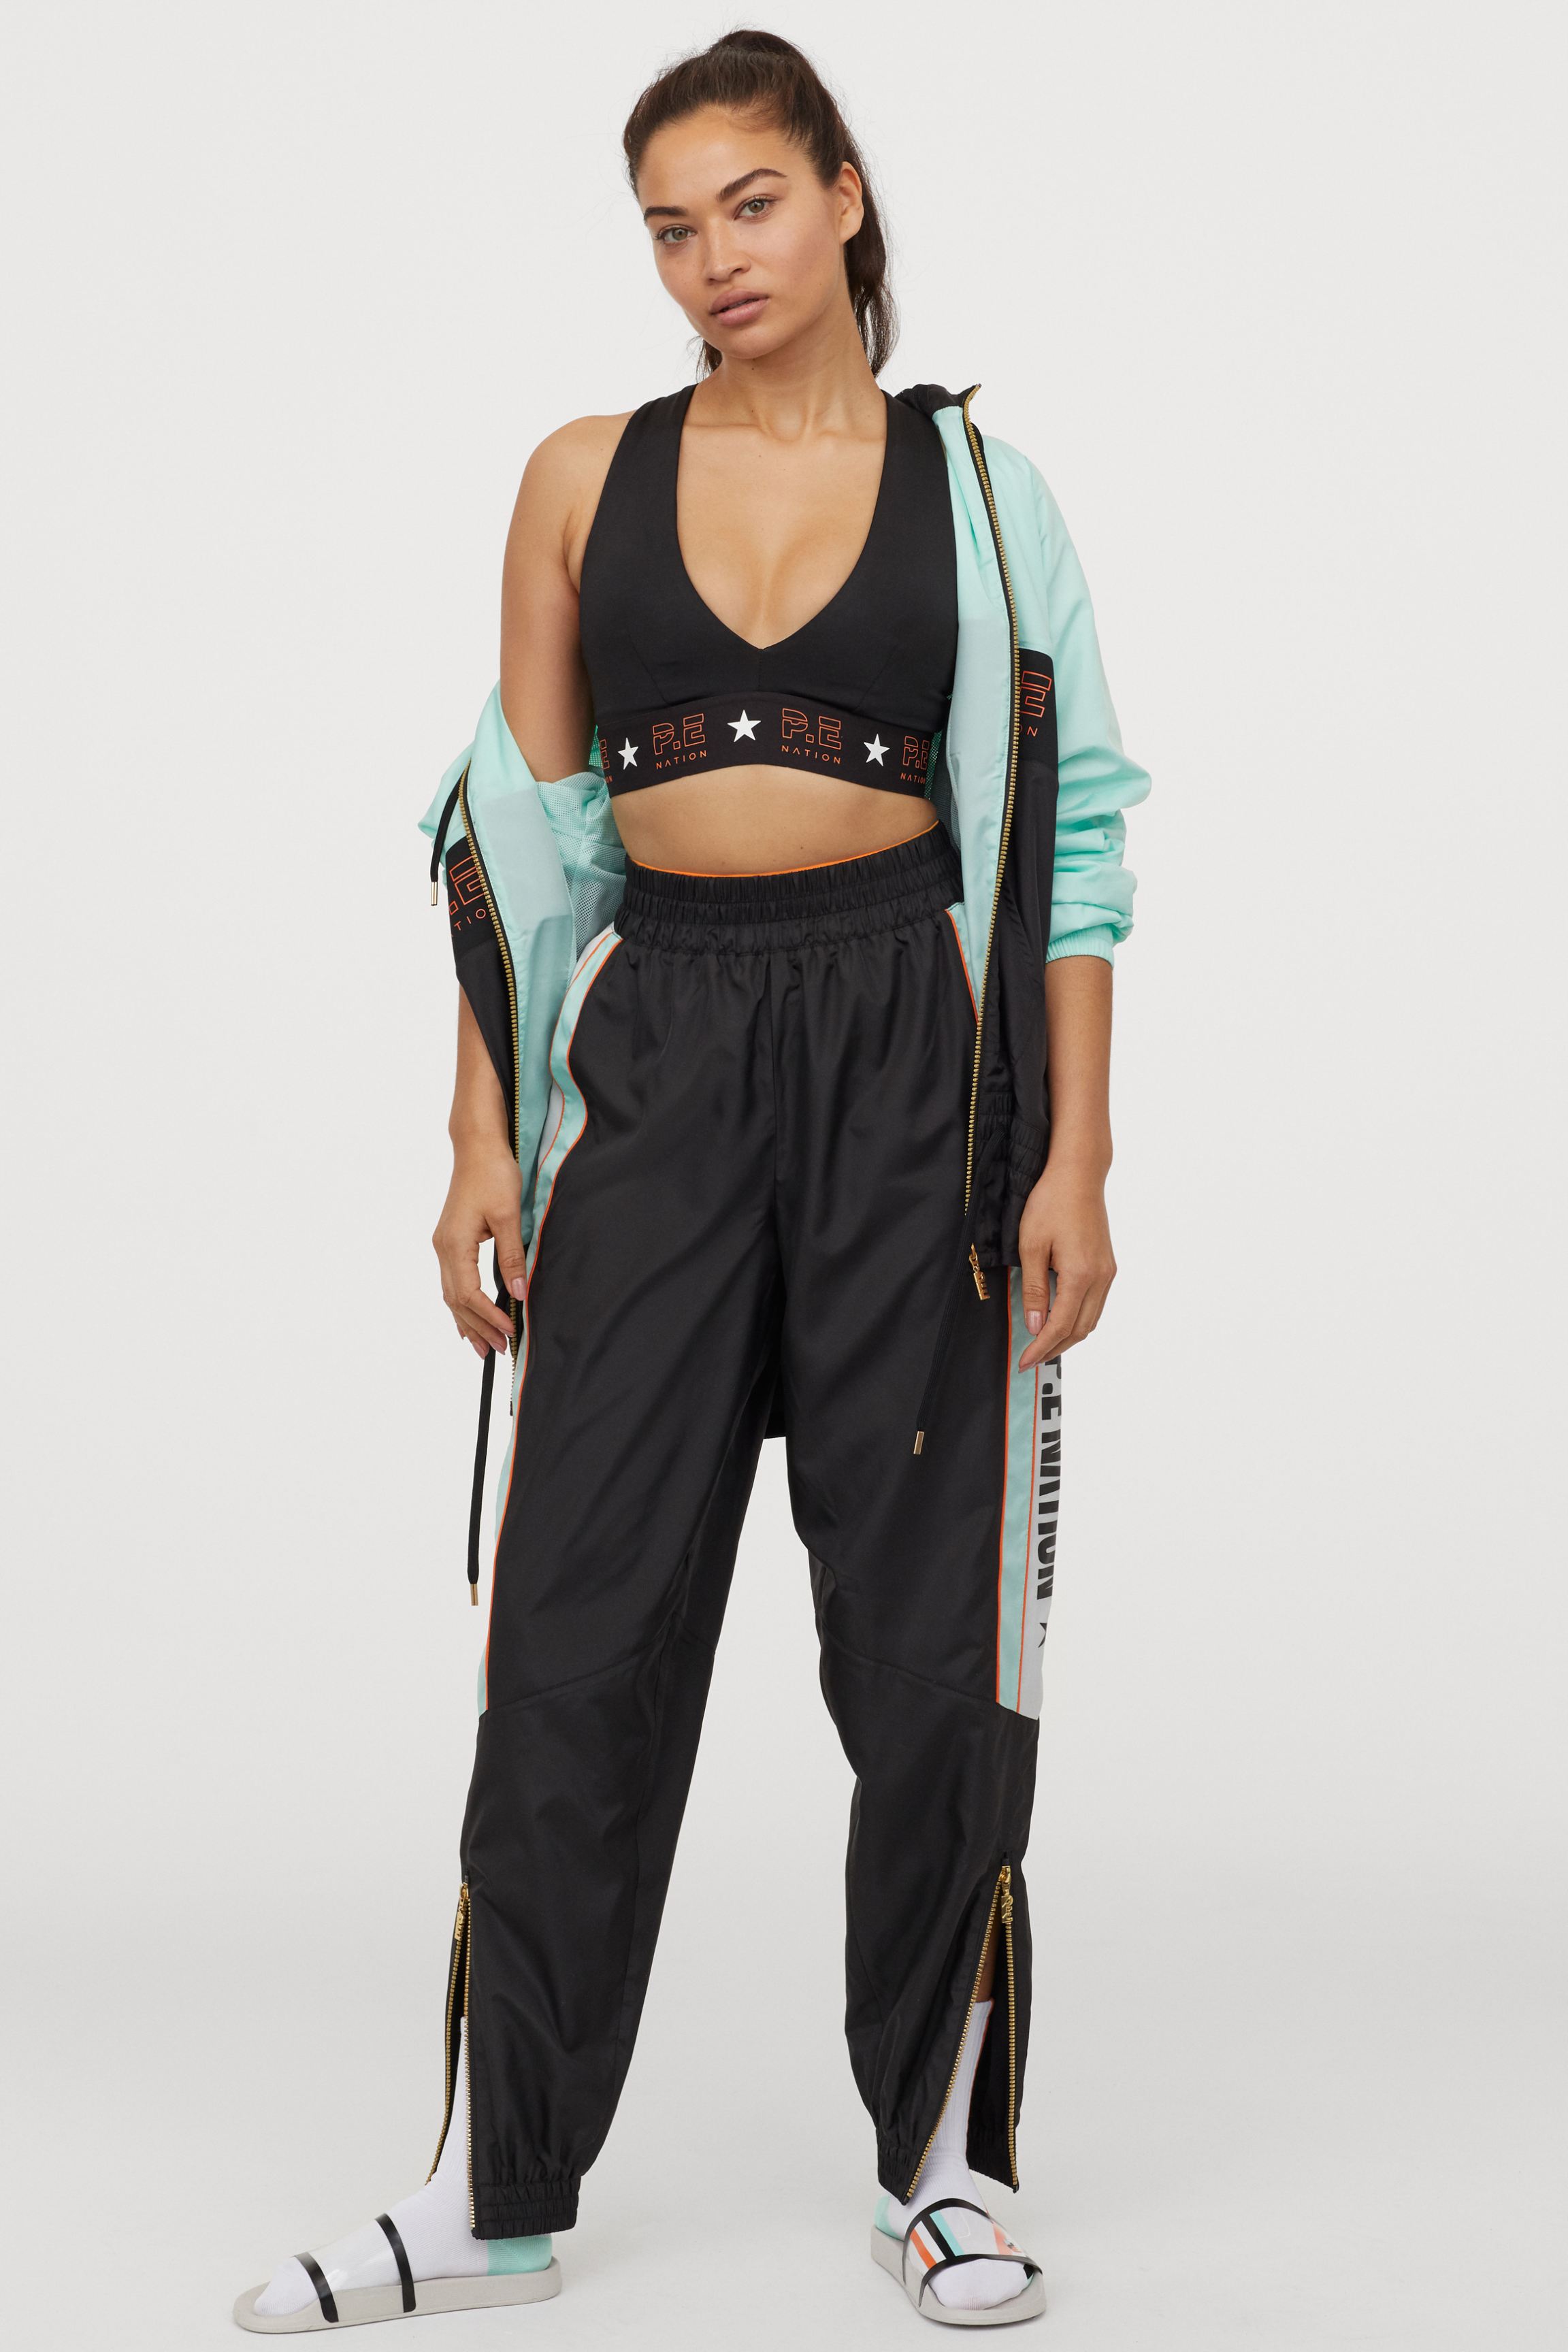 H&M x P.E Nation Collab: Activewear, Swimwear & Clothes